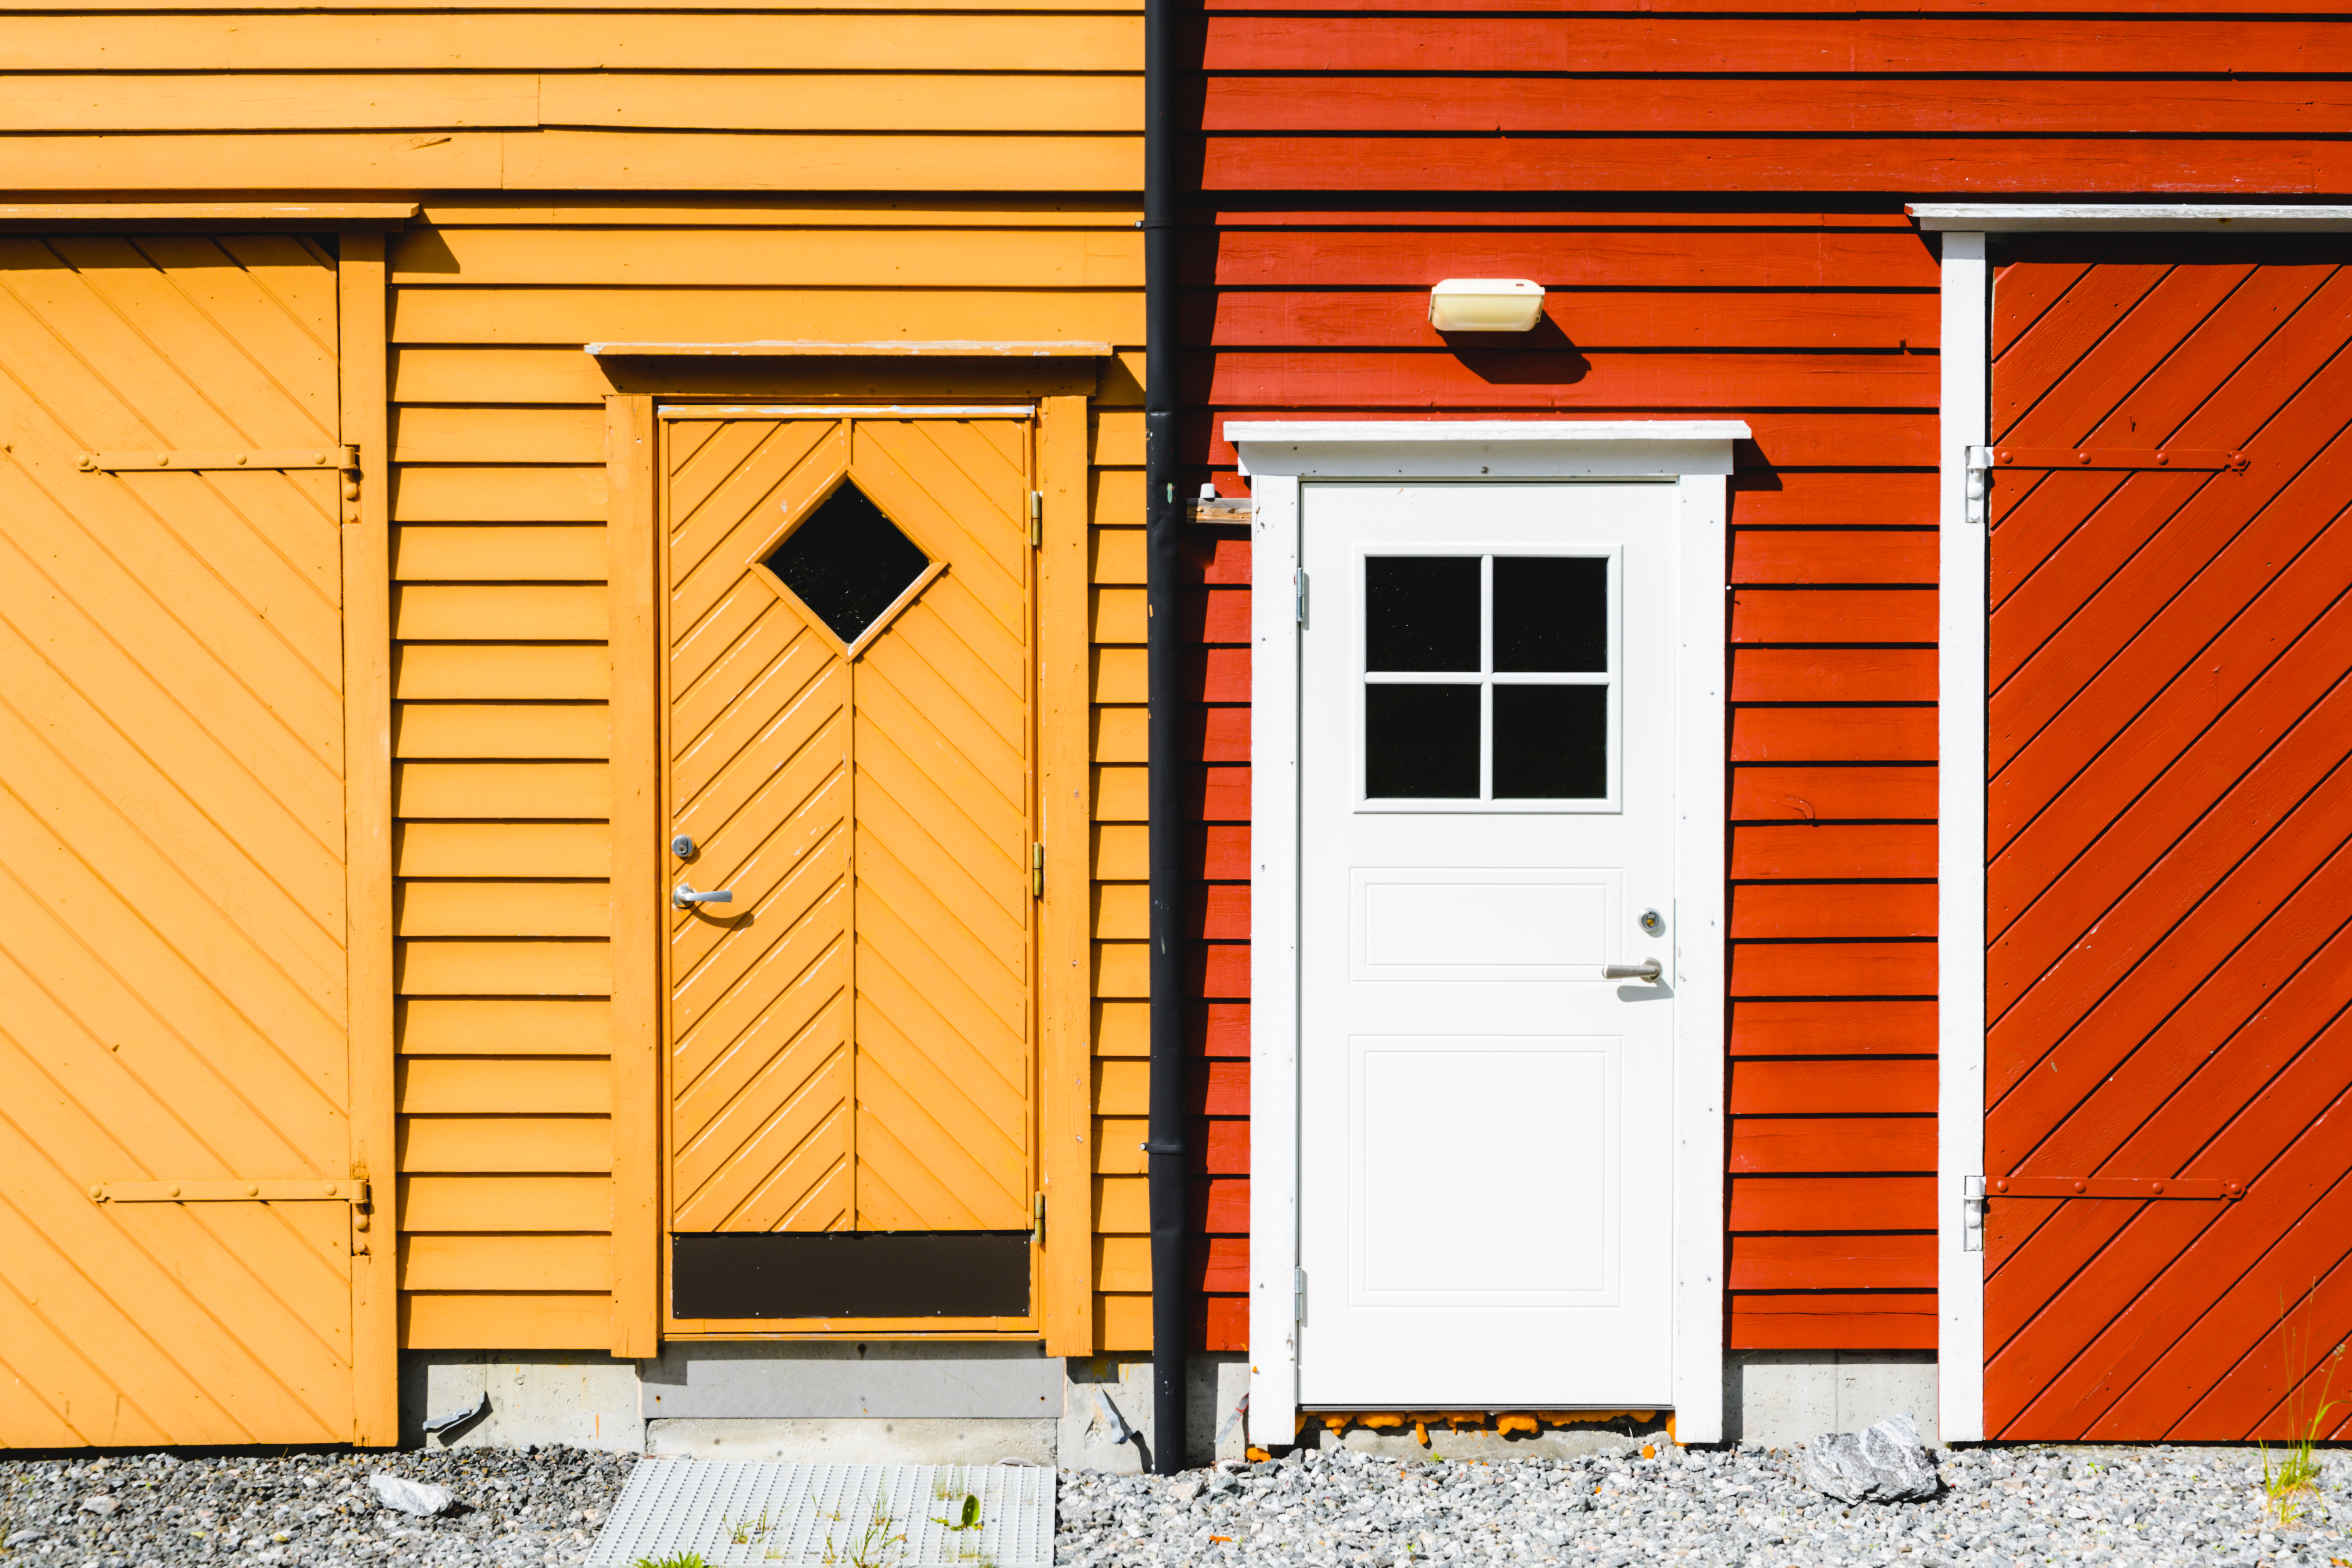 Doors of two neighboring houses | Source: Getty Images